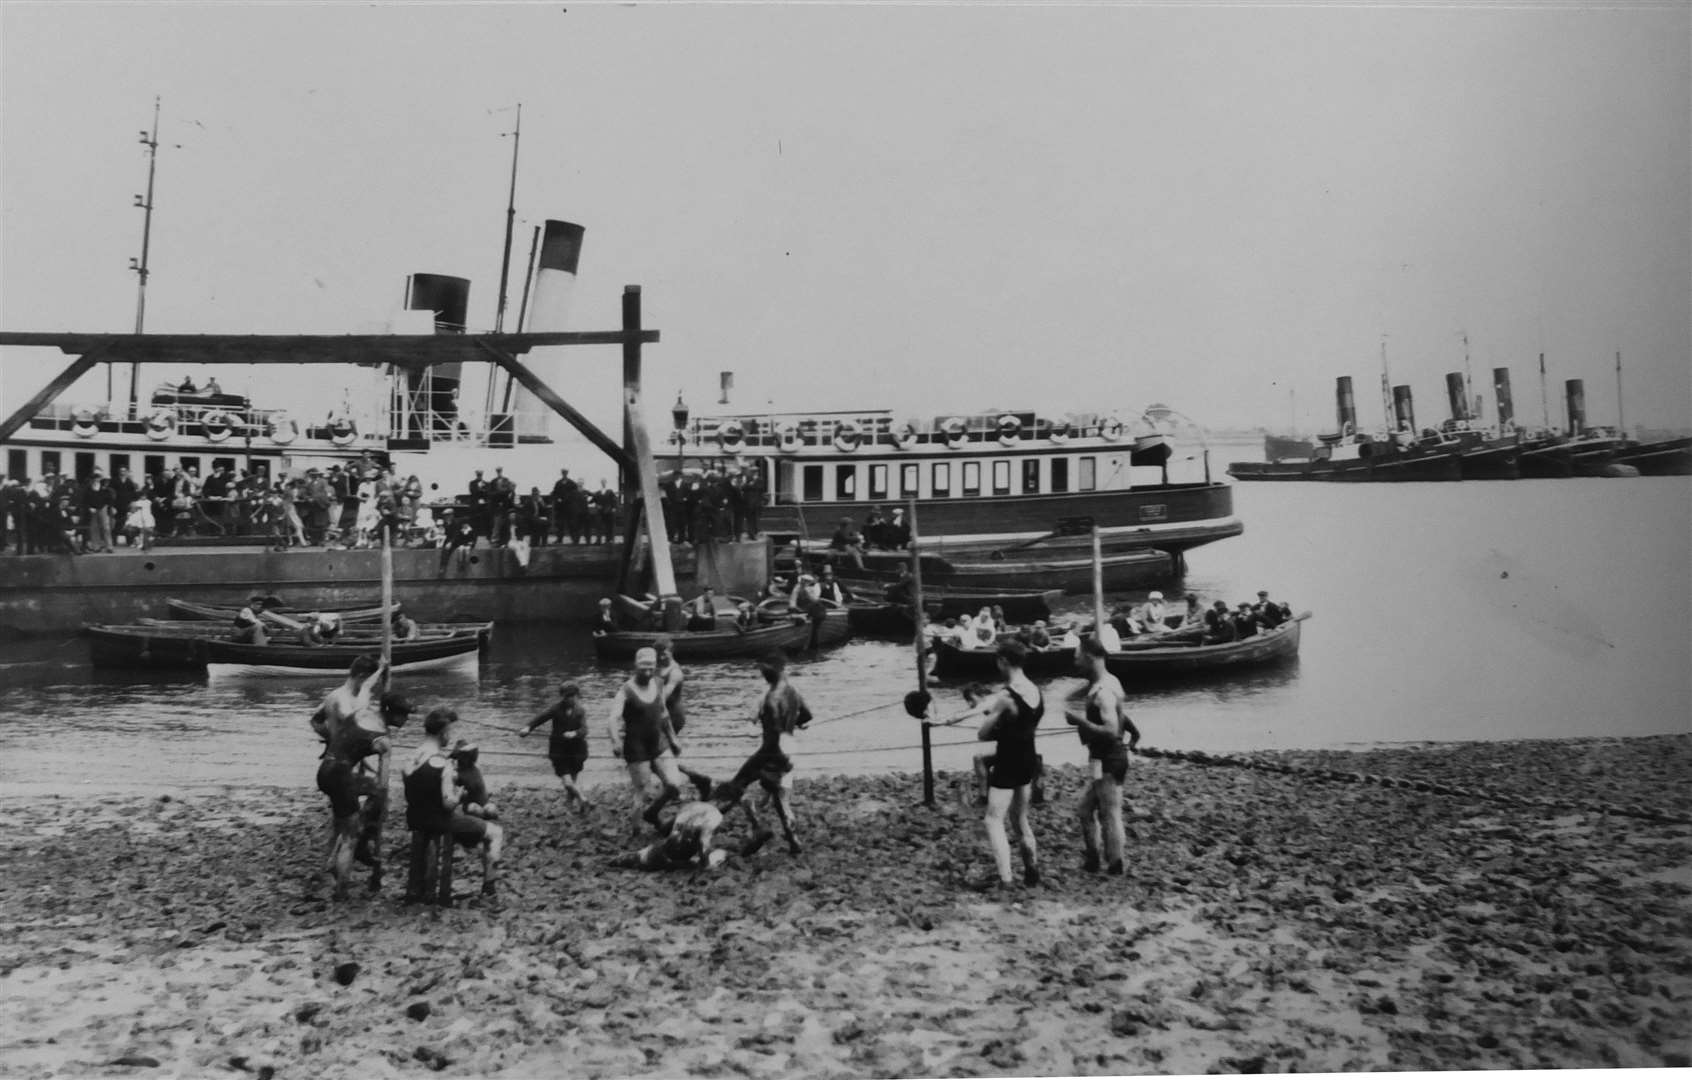 The mudlarks of Gravesend in a wrestling match on the beach alongside the pier in 1925